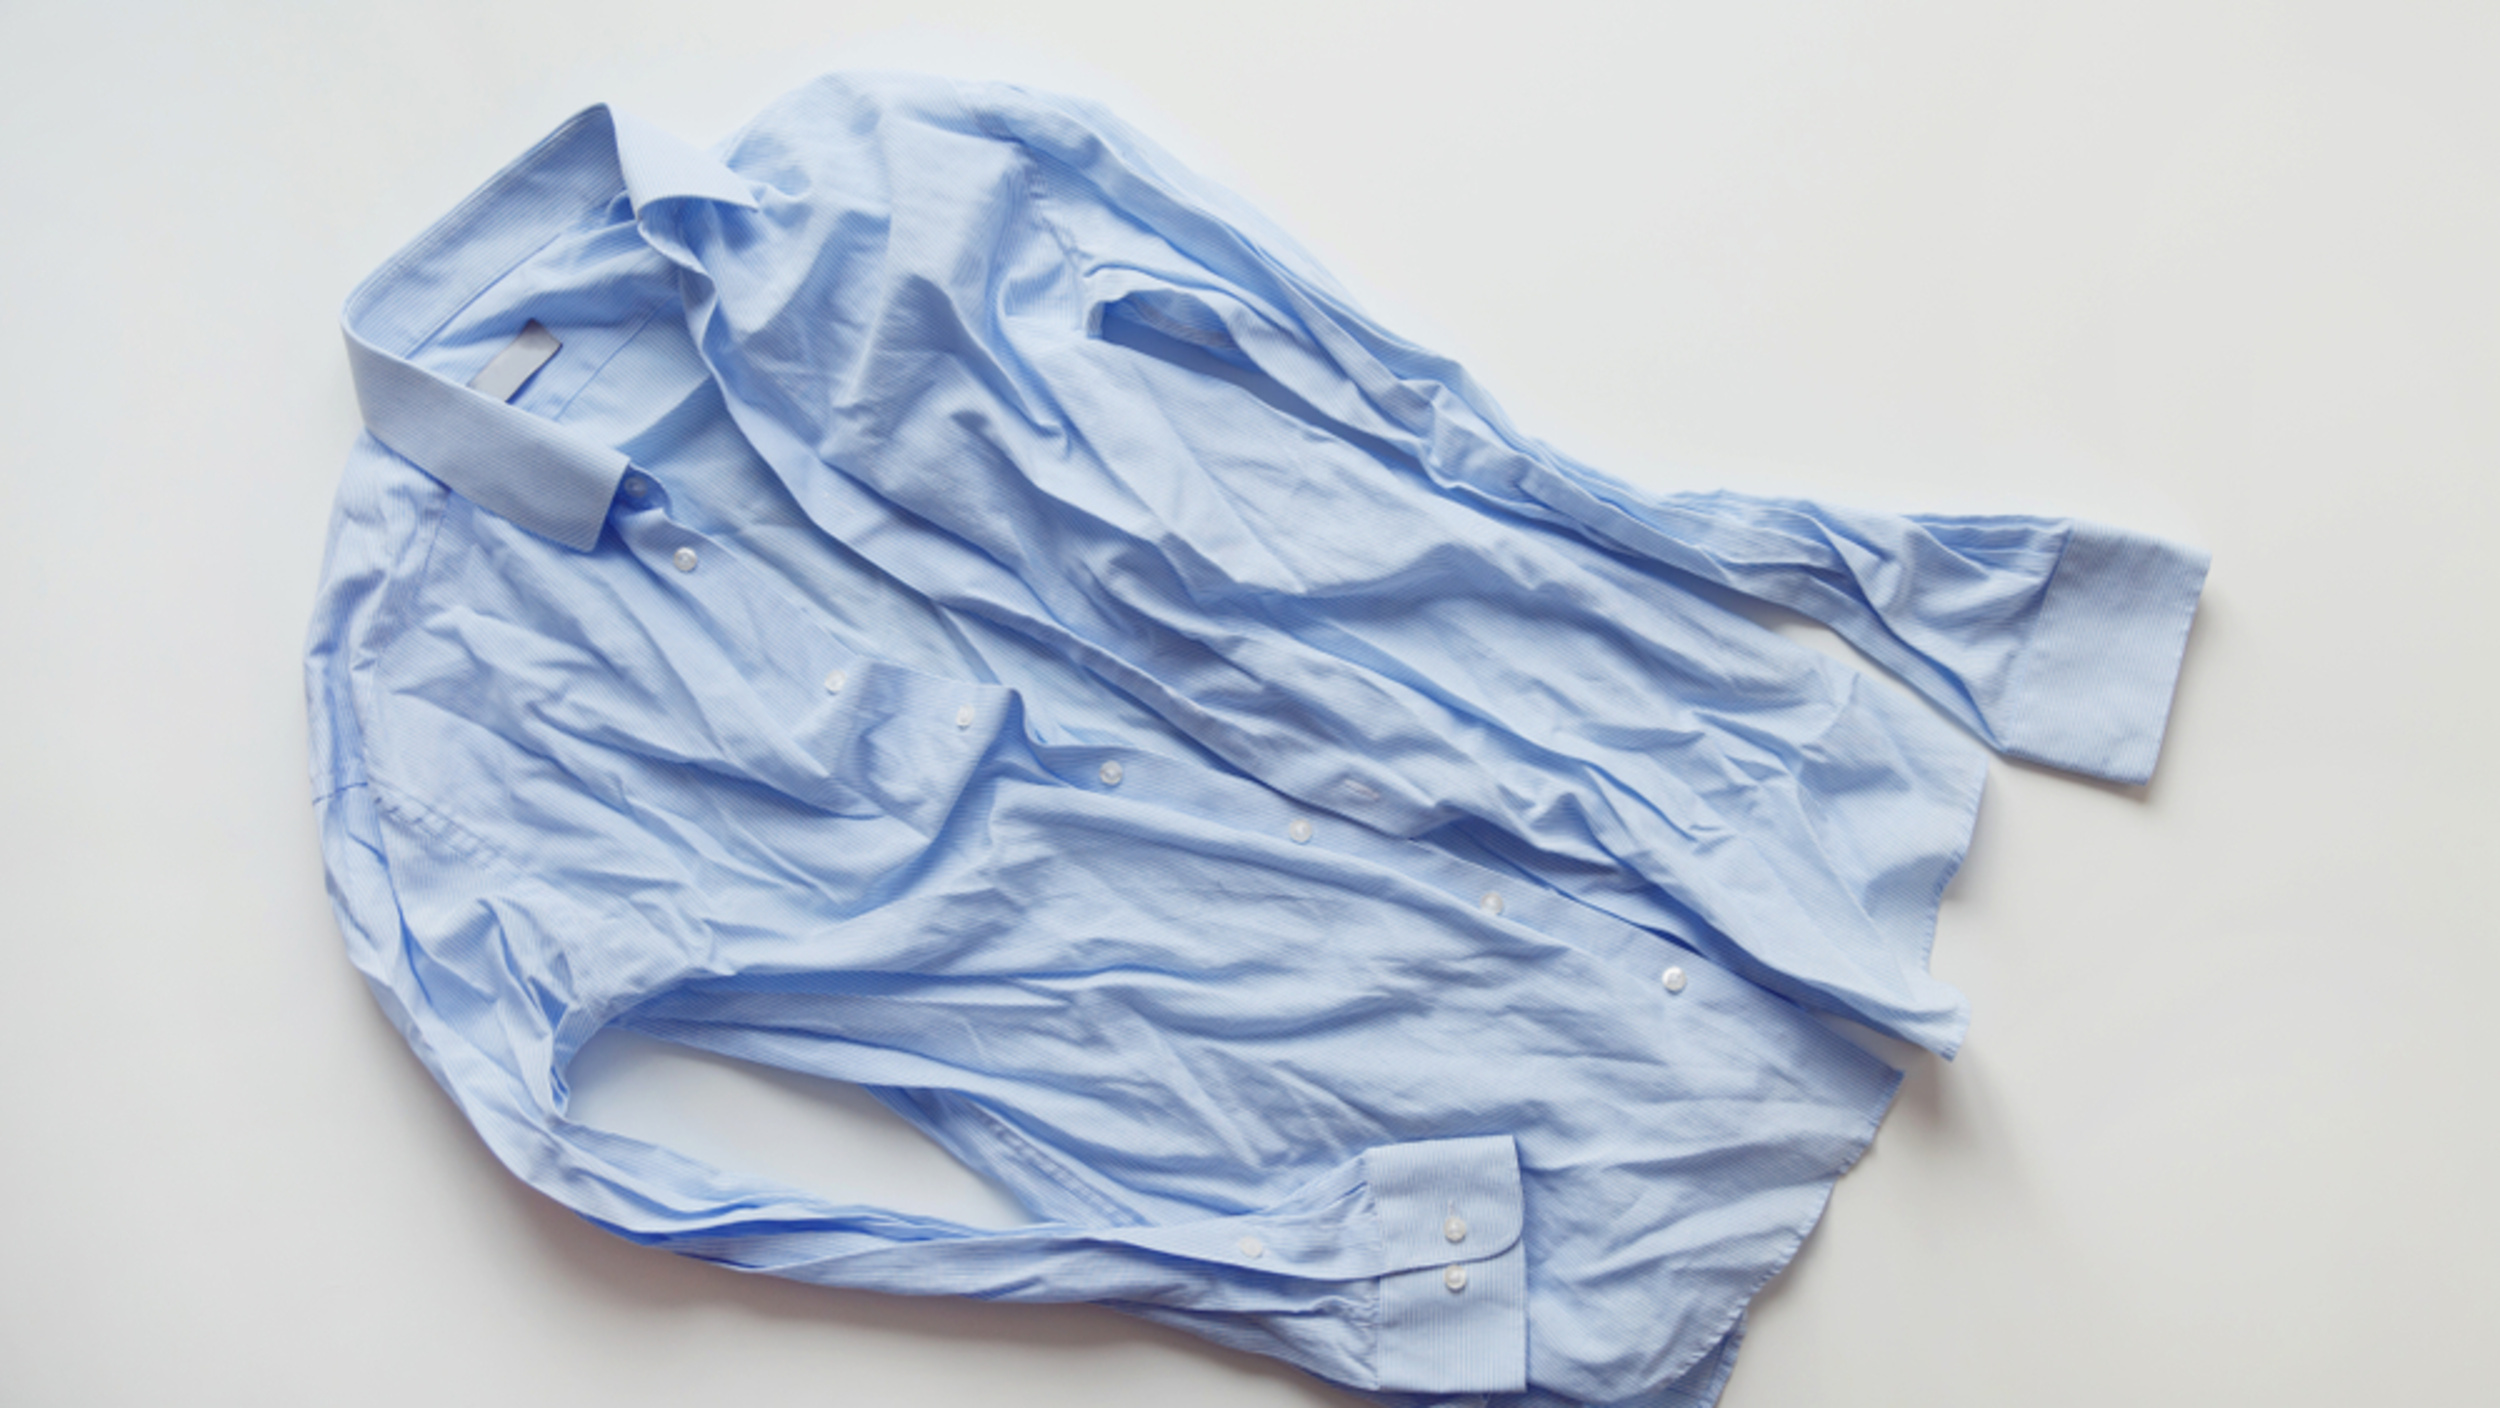 <p>If you're too busy to iron, tossing a few ice cubes (or a moistened washcloth) into the dryer with your clothes will make quick work of any lingering wrinkles. To add a little freshness, add a few drops of essential oils onto the washcloth. </p><p>You may also like: <a href='https://www.yardbarker.com/lifestyle/articles/our_25_favorite_fair_foods_of_all_time_110823/s1__24412345'>Our 25 favorite fair foods of all time</a></p>